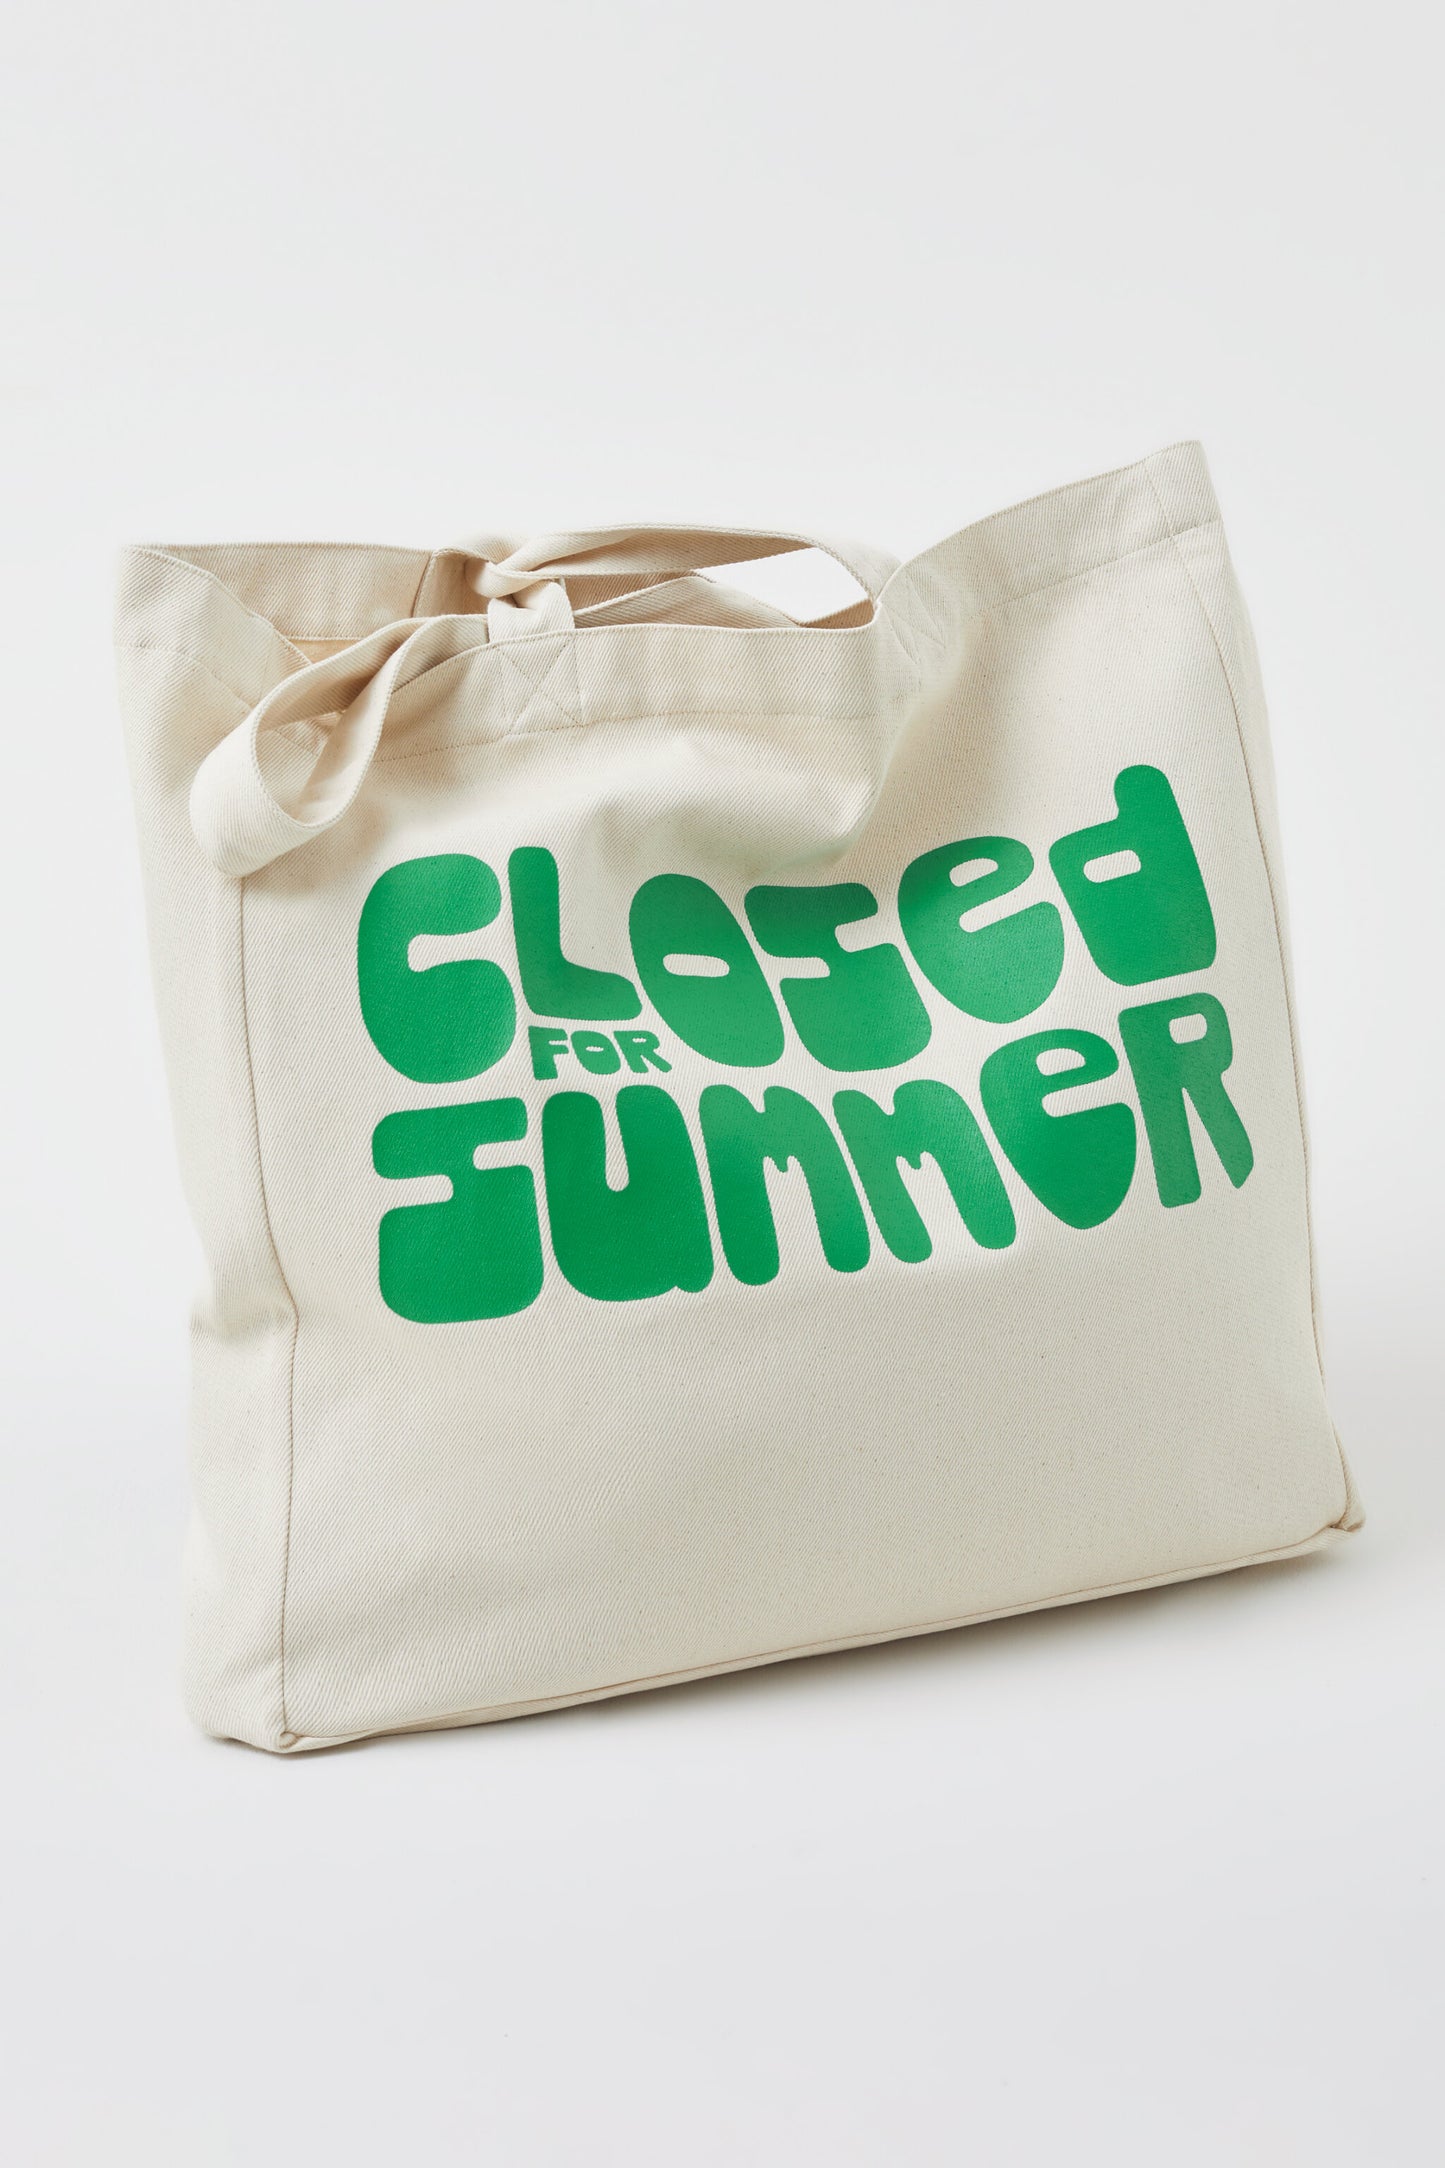 Closed for Summer Bag